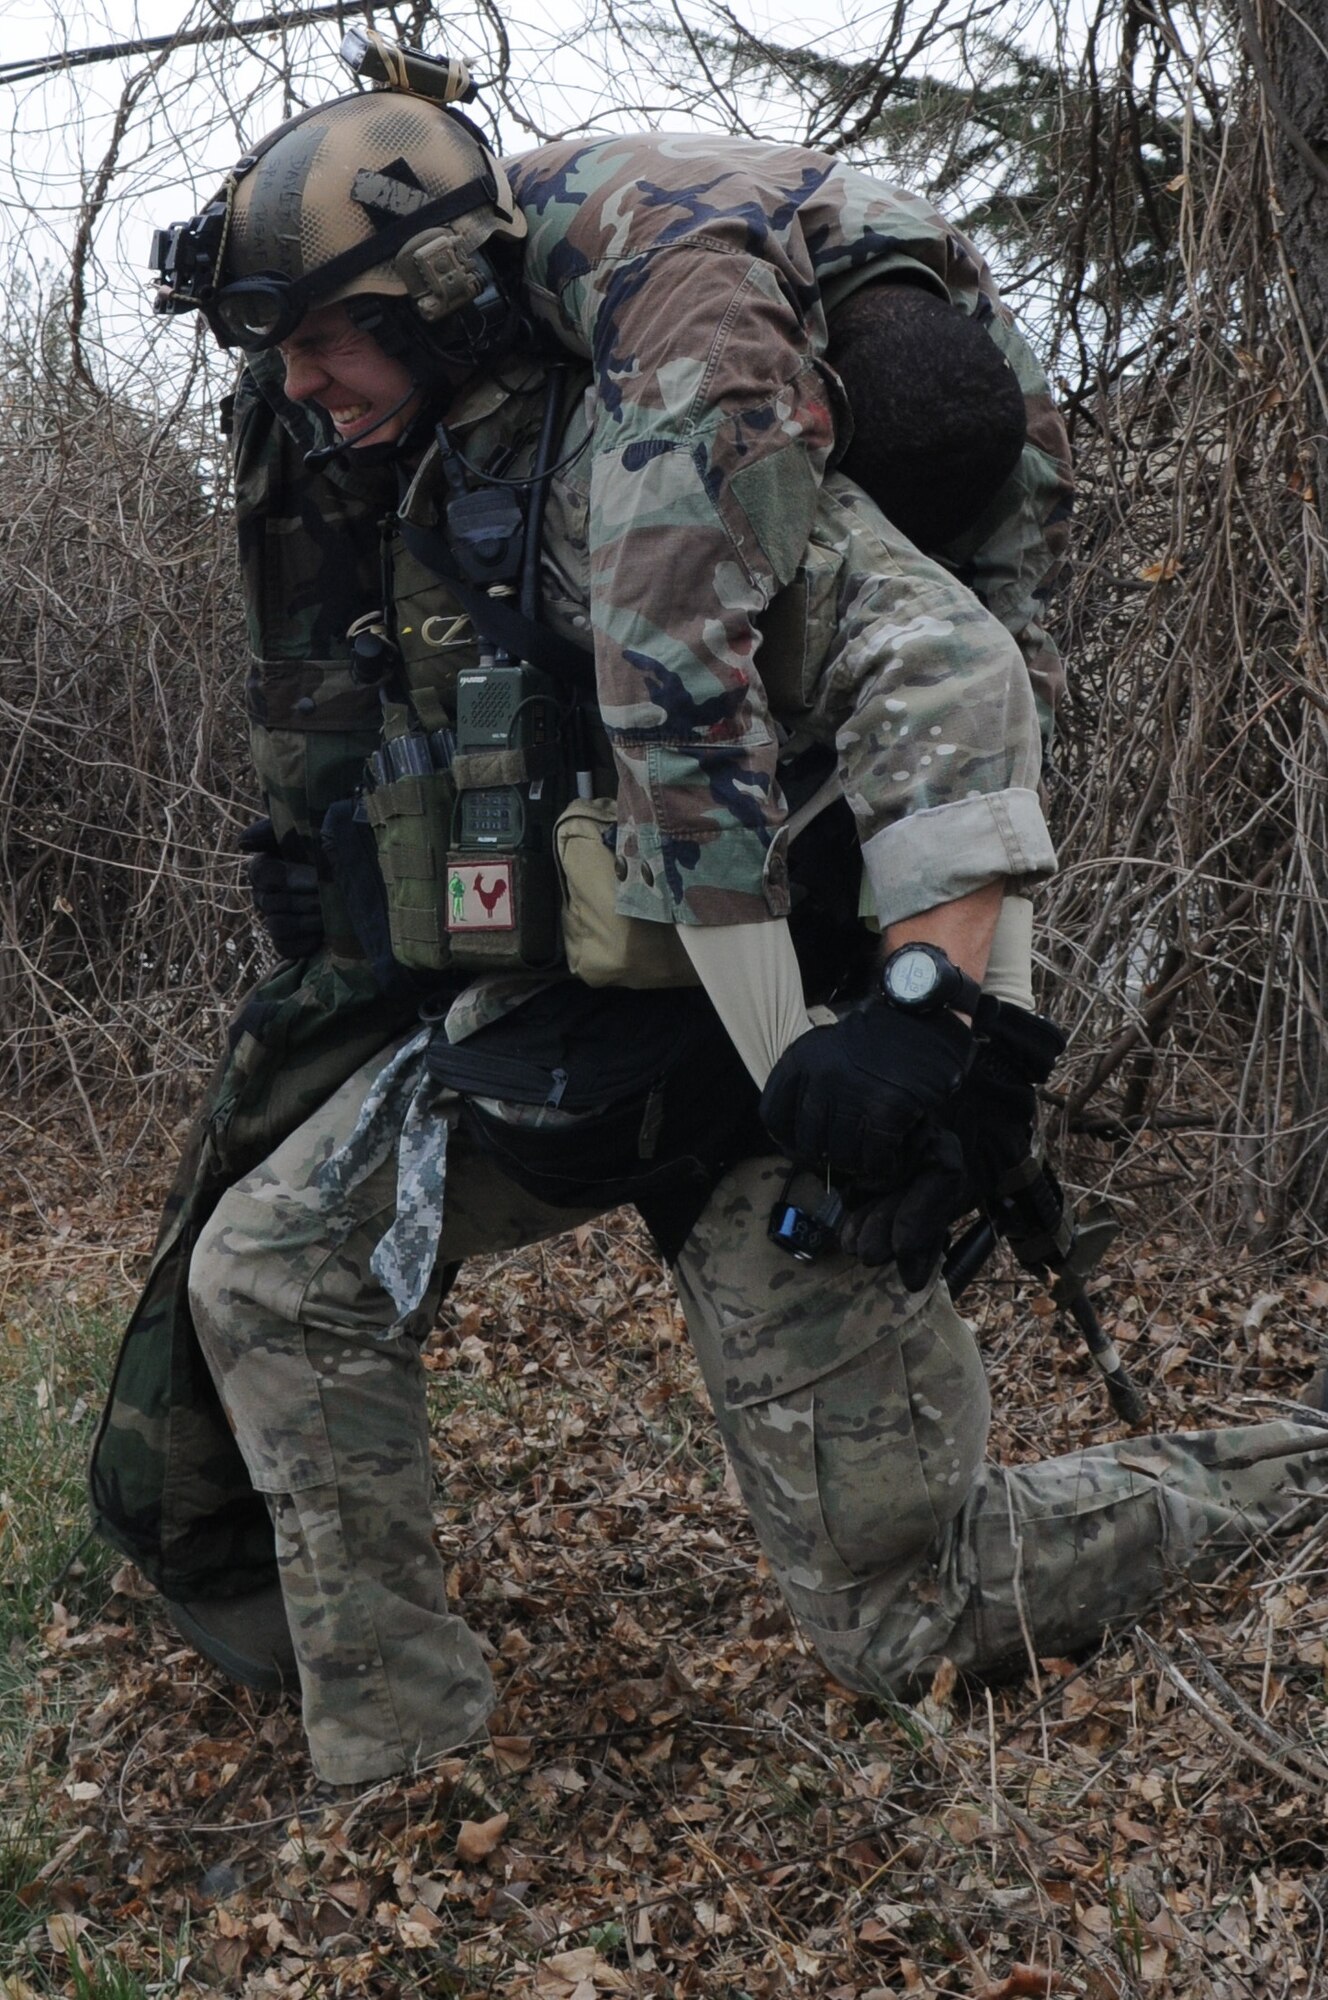 DAEGU AIR BASE, Republic of Korea -- Senior Airman David Craig, a pararescueman from the 320th Special Tactics Squadron, lifts a simulated wounded soldier to take him to the casualty collection point during a mass casualty exercise here March 27. The scenario is part of the 353rd Special Operations Group’s annual operational readiness exercise. (U.S. Air Force photo by Tech. Sgt. Aaron Cram)